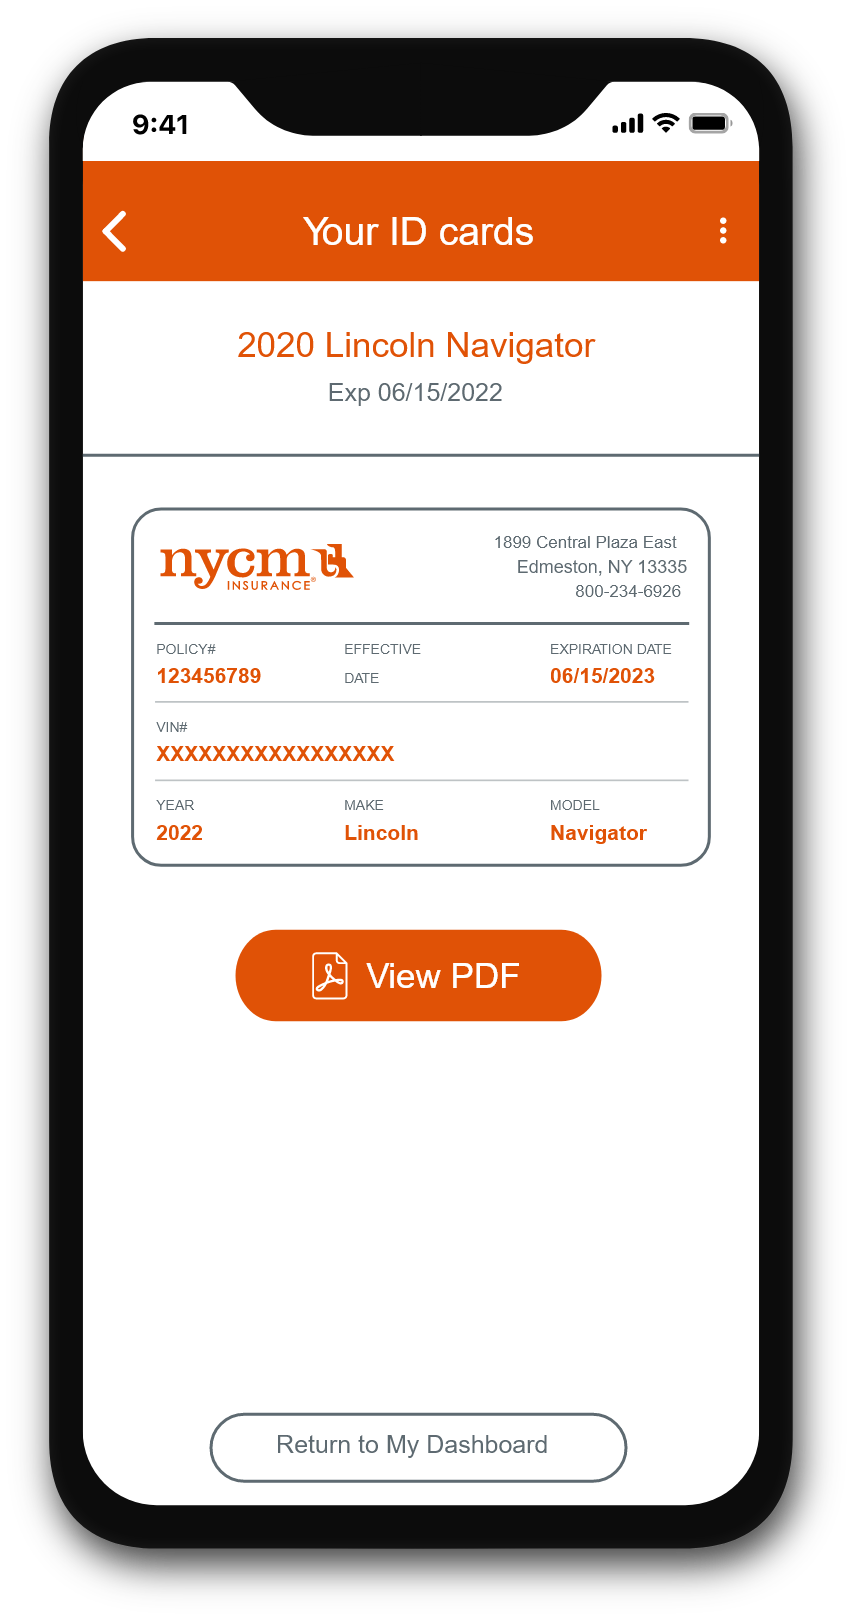 Image of app displaying an insurance ID card